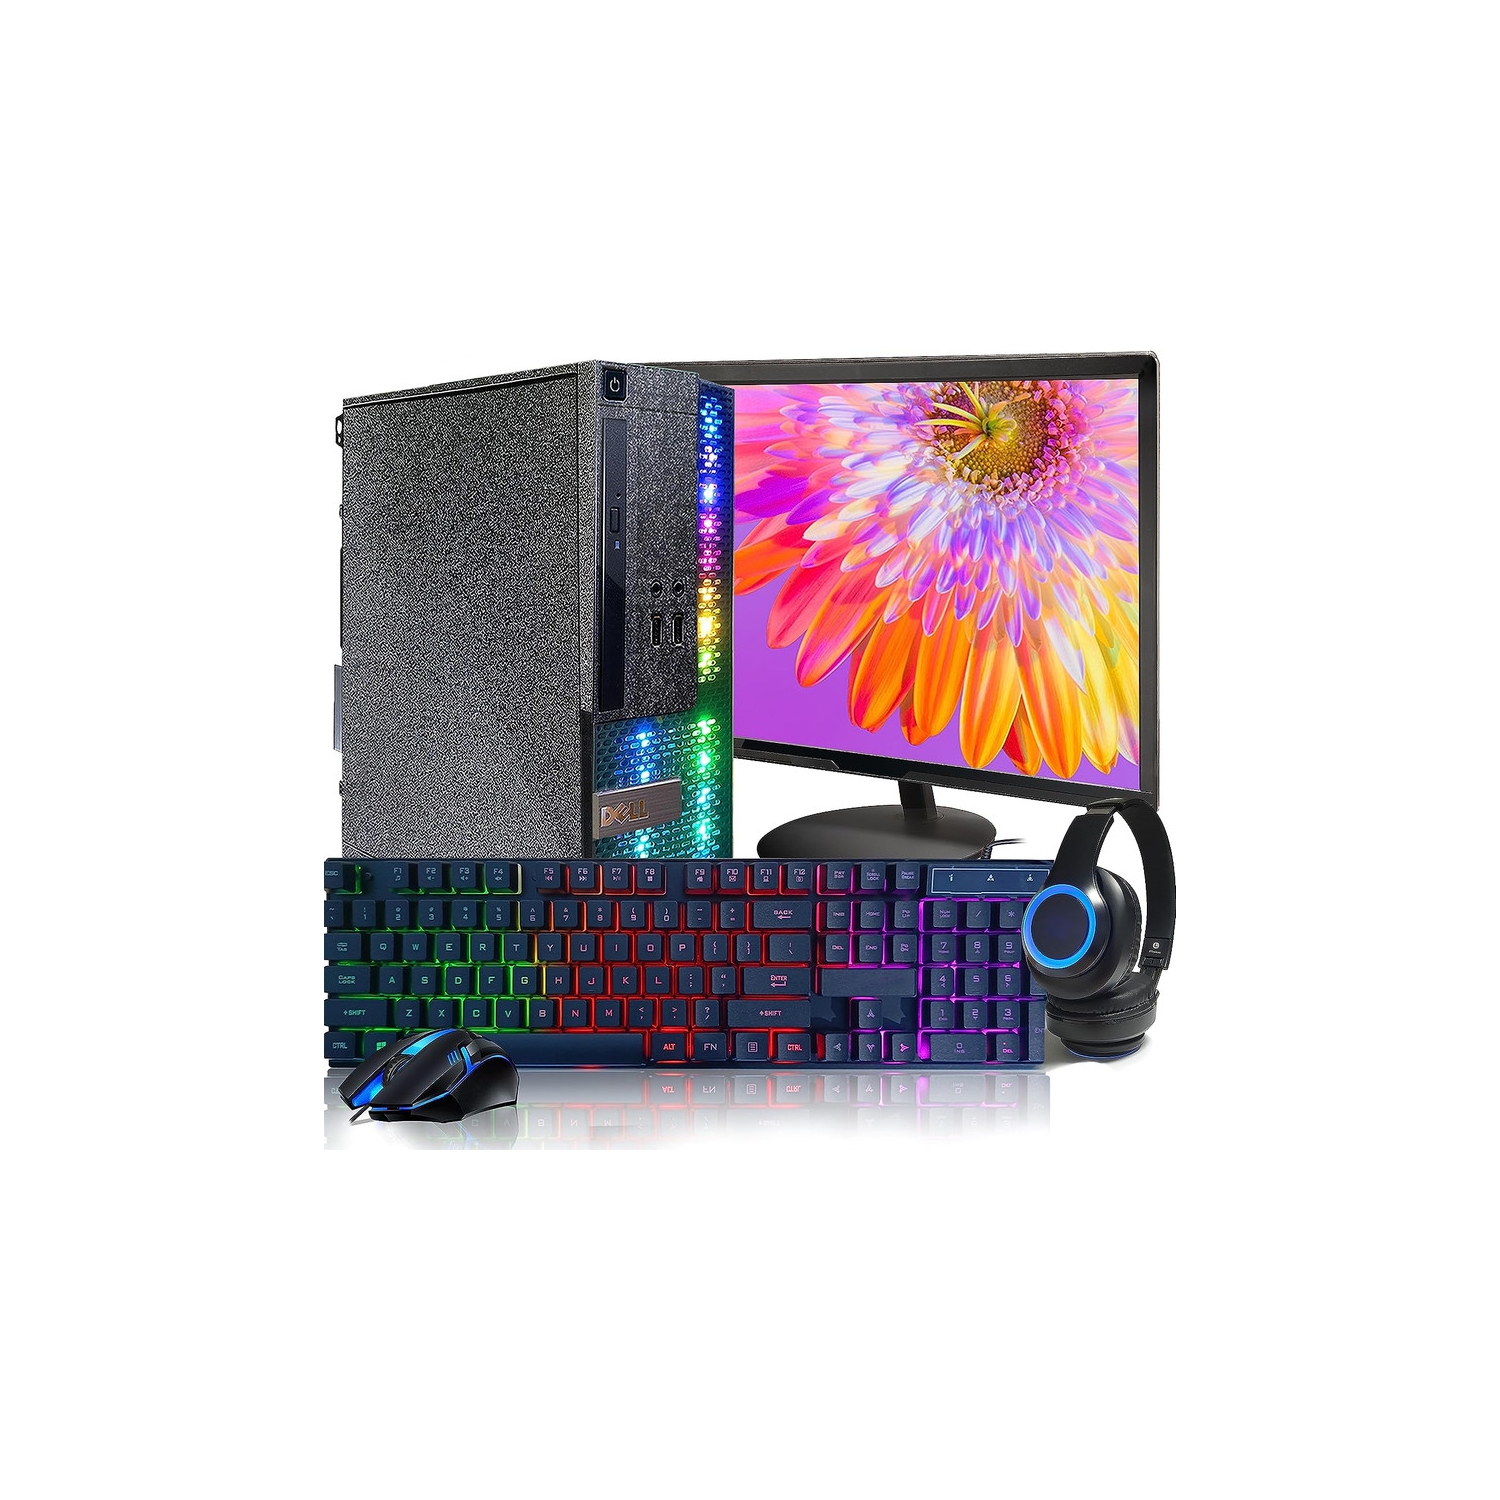 Dell RGB Gaming Desktop PC, Intel Core I7 up to 3.8G, GTX 750 Ti 4G, 16G, 512G SSD,WiFi,BT,RGB Keyboard & Mouse, New 22" 1080 FHD LED,RGB Headphone,Win 10Pro -Refurbished Excellent